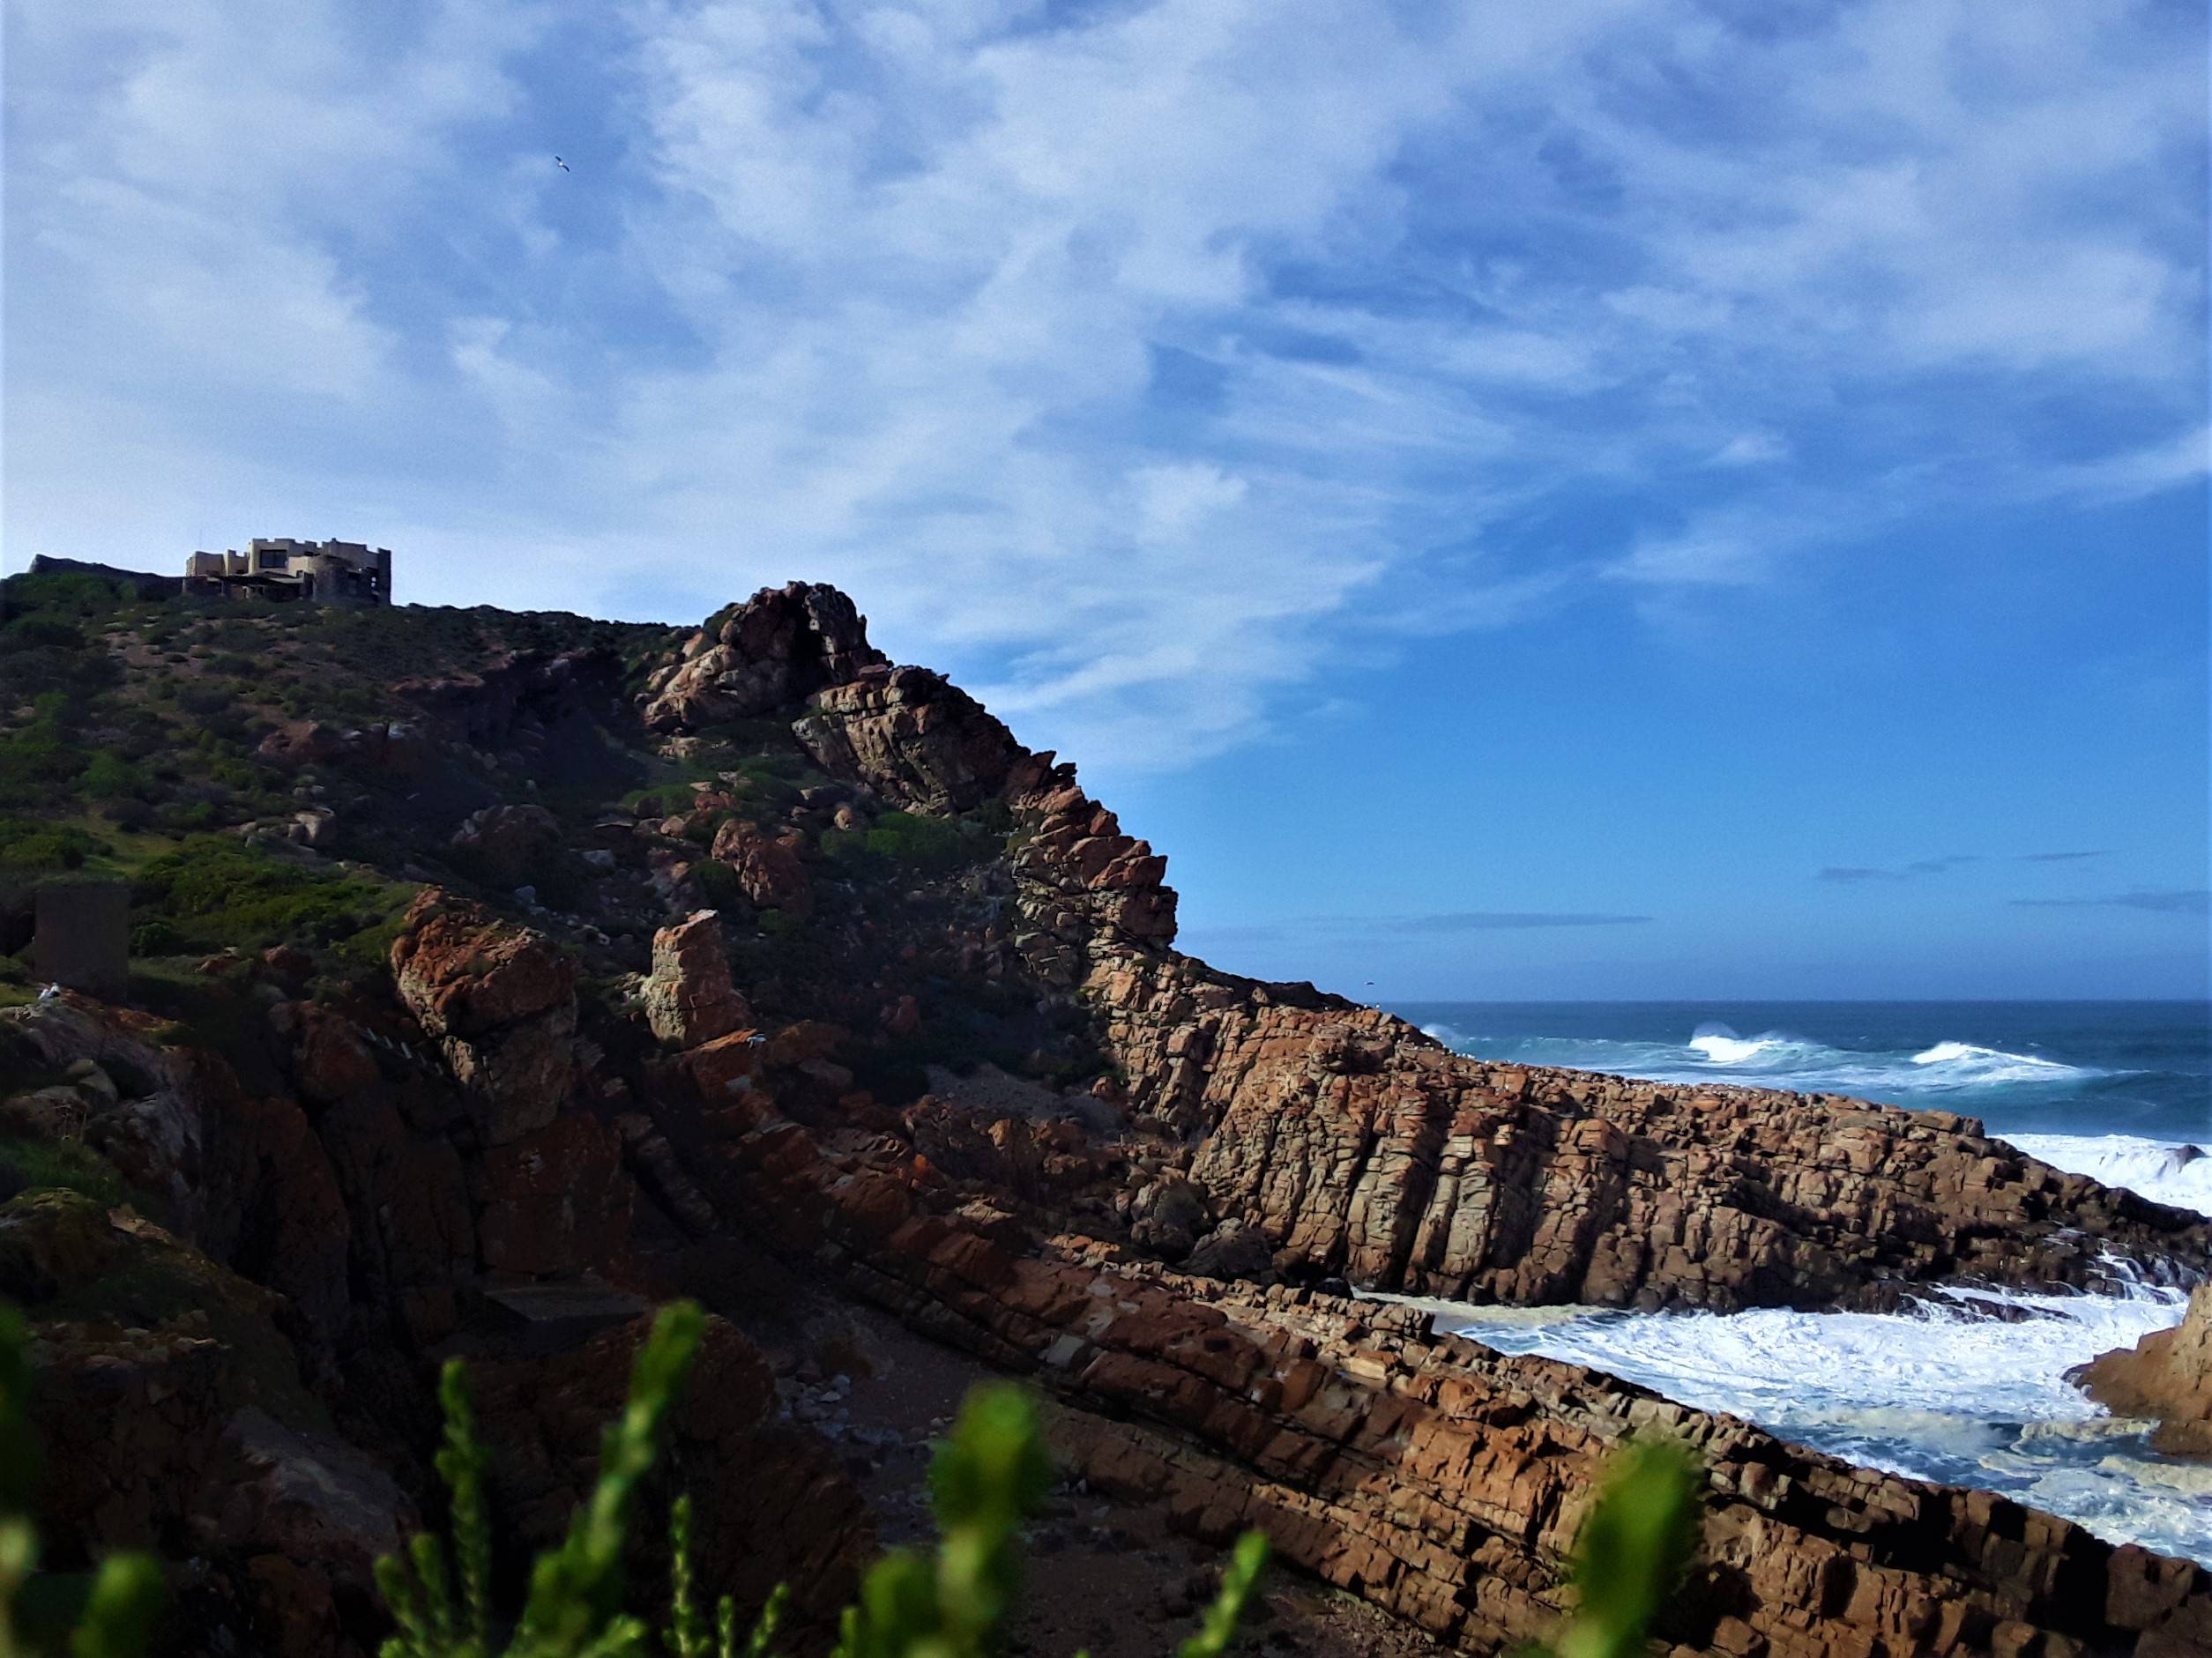 Encountering the Enchanted Castle on my remote hiking trail, south coast of Africa